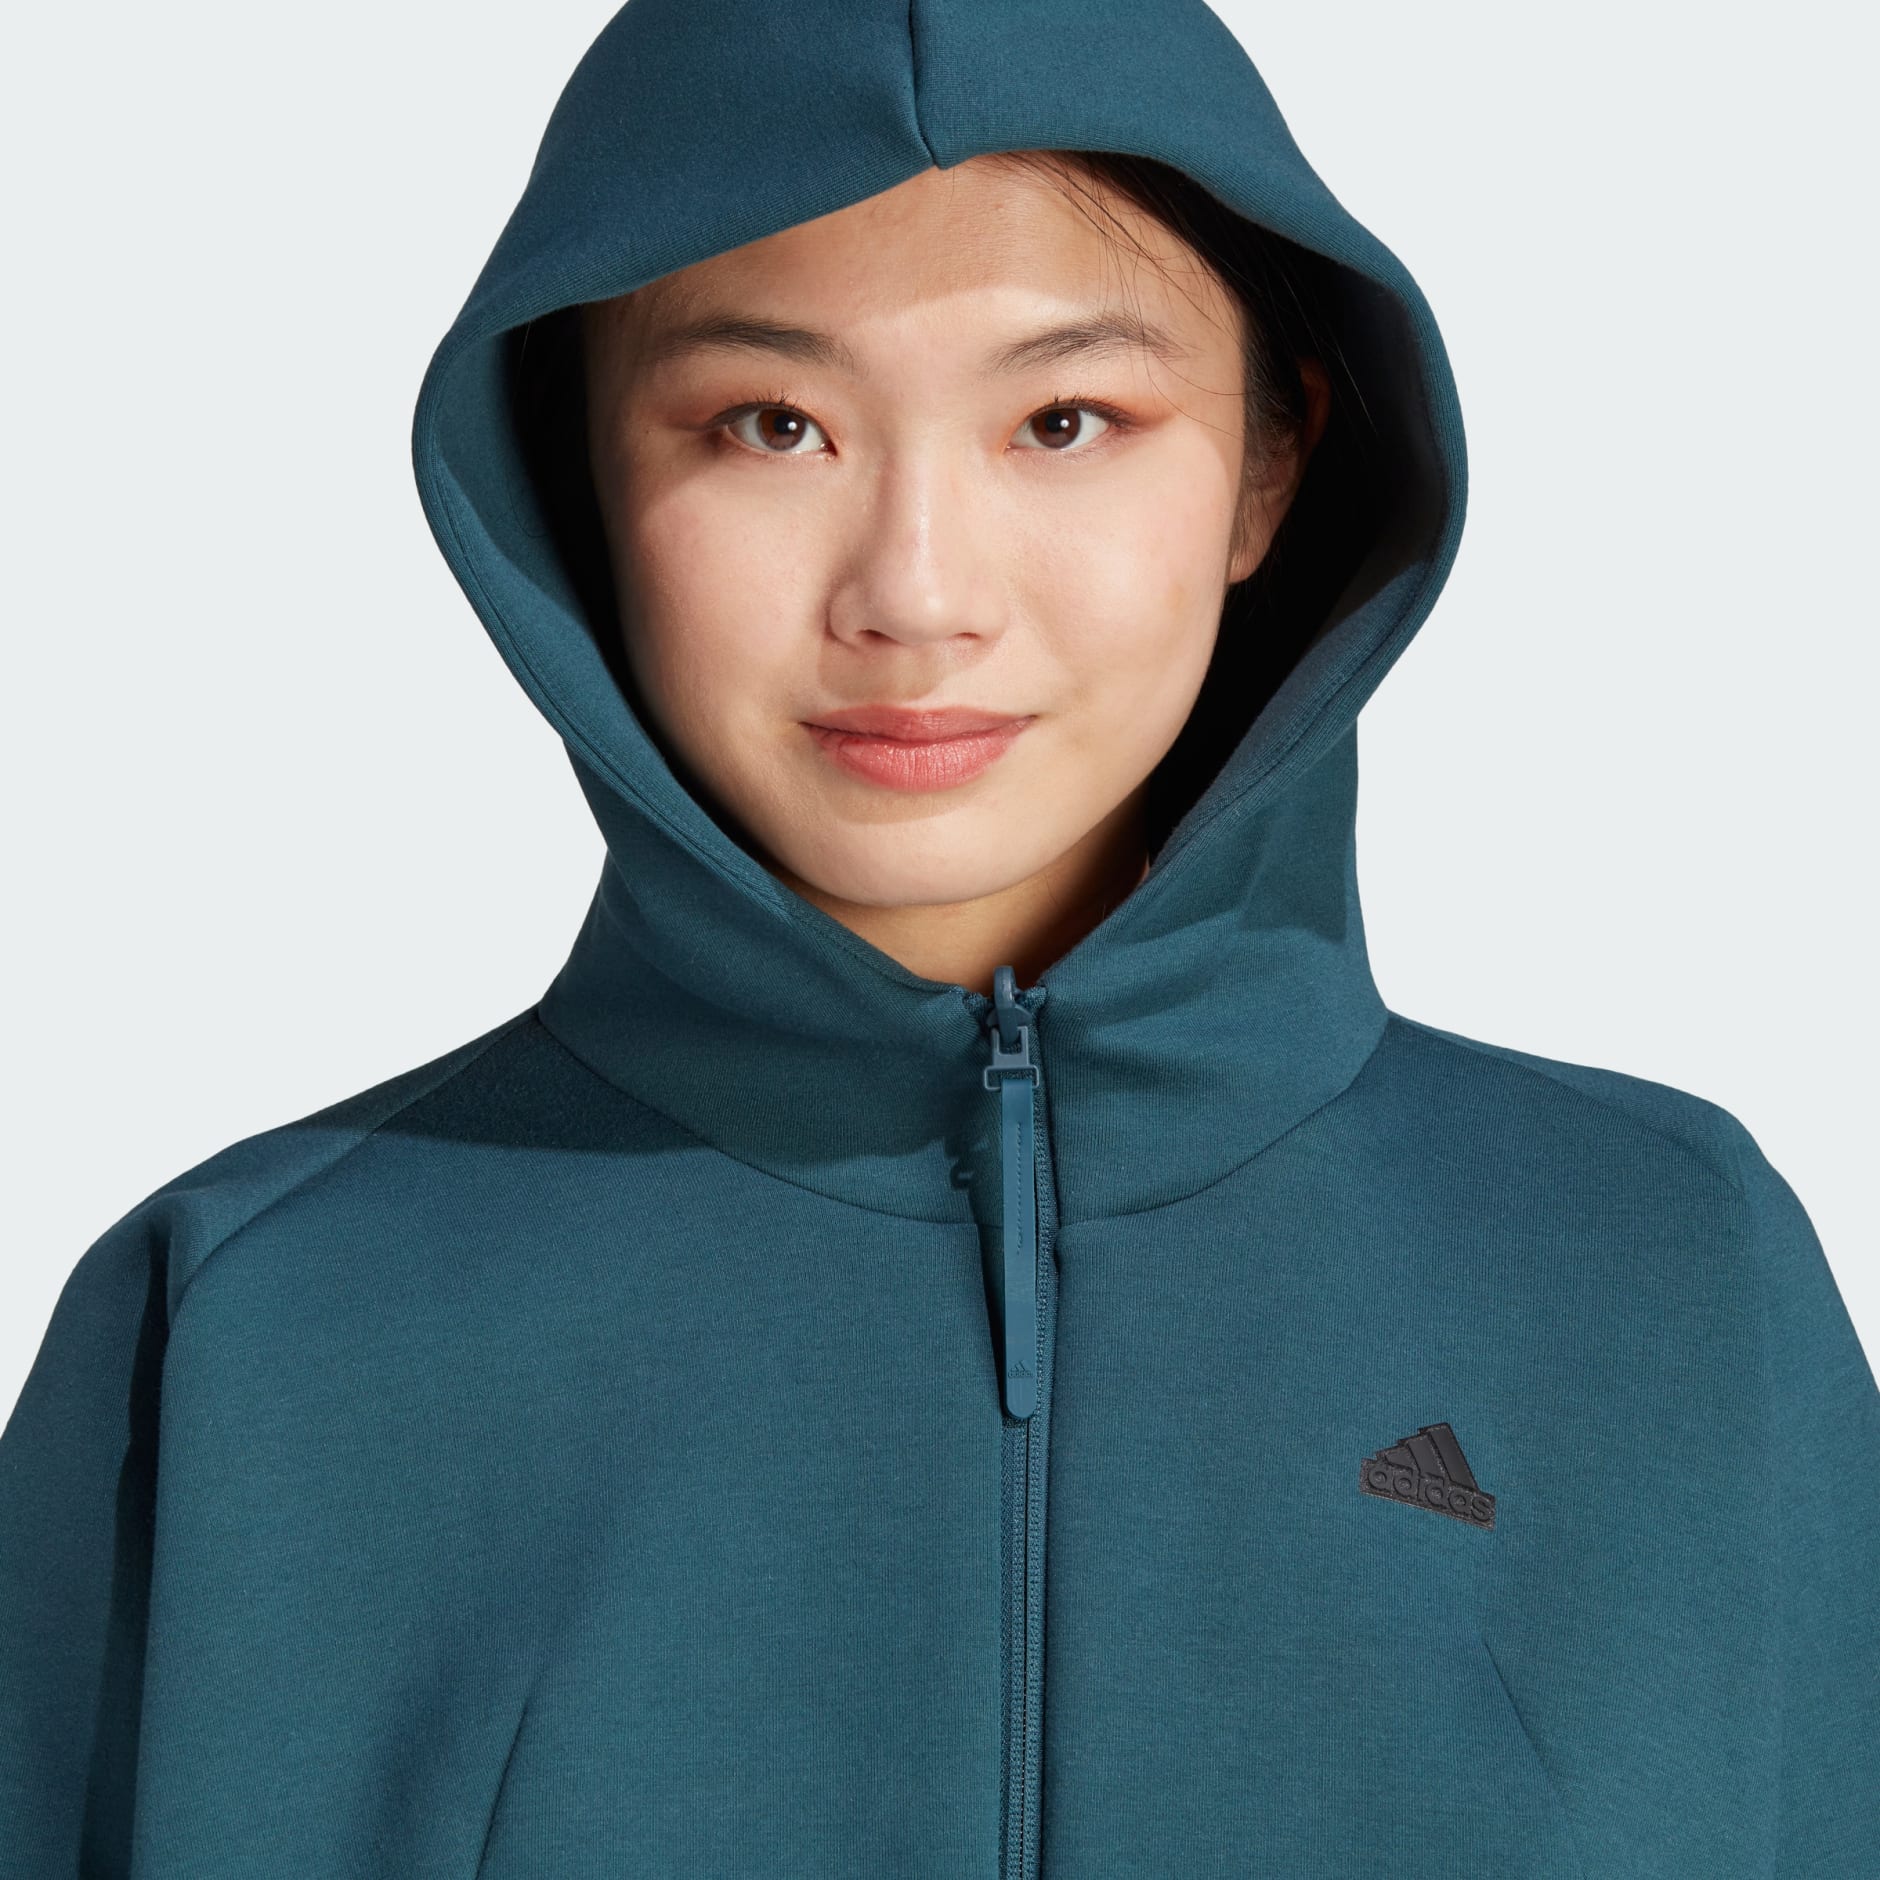 Clothing - adidas Z.N.E. Full-Zip Hoodie - Turquoise | adidas South Africa